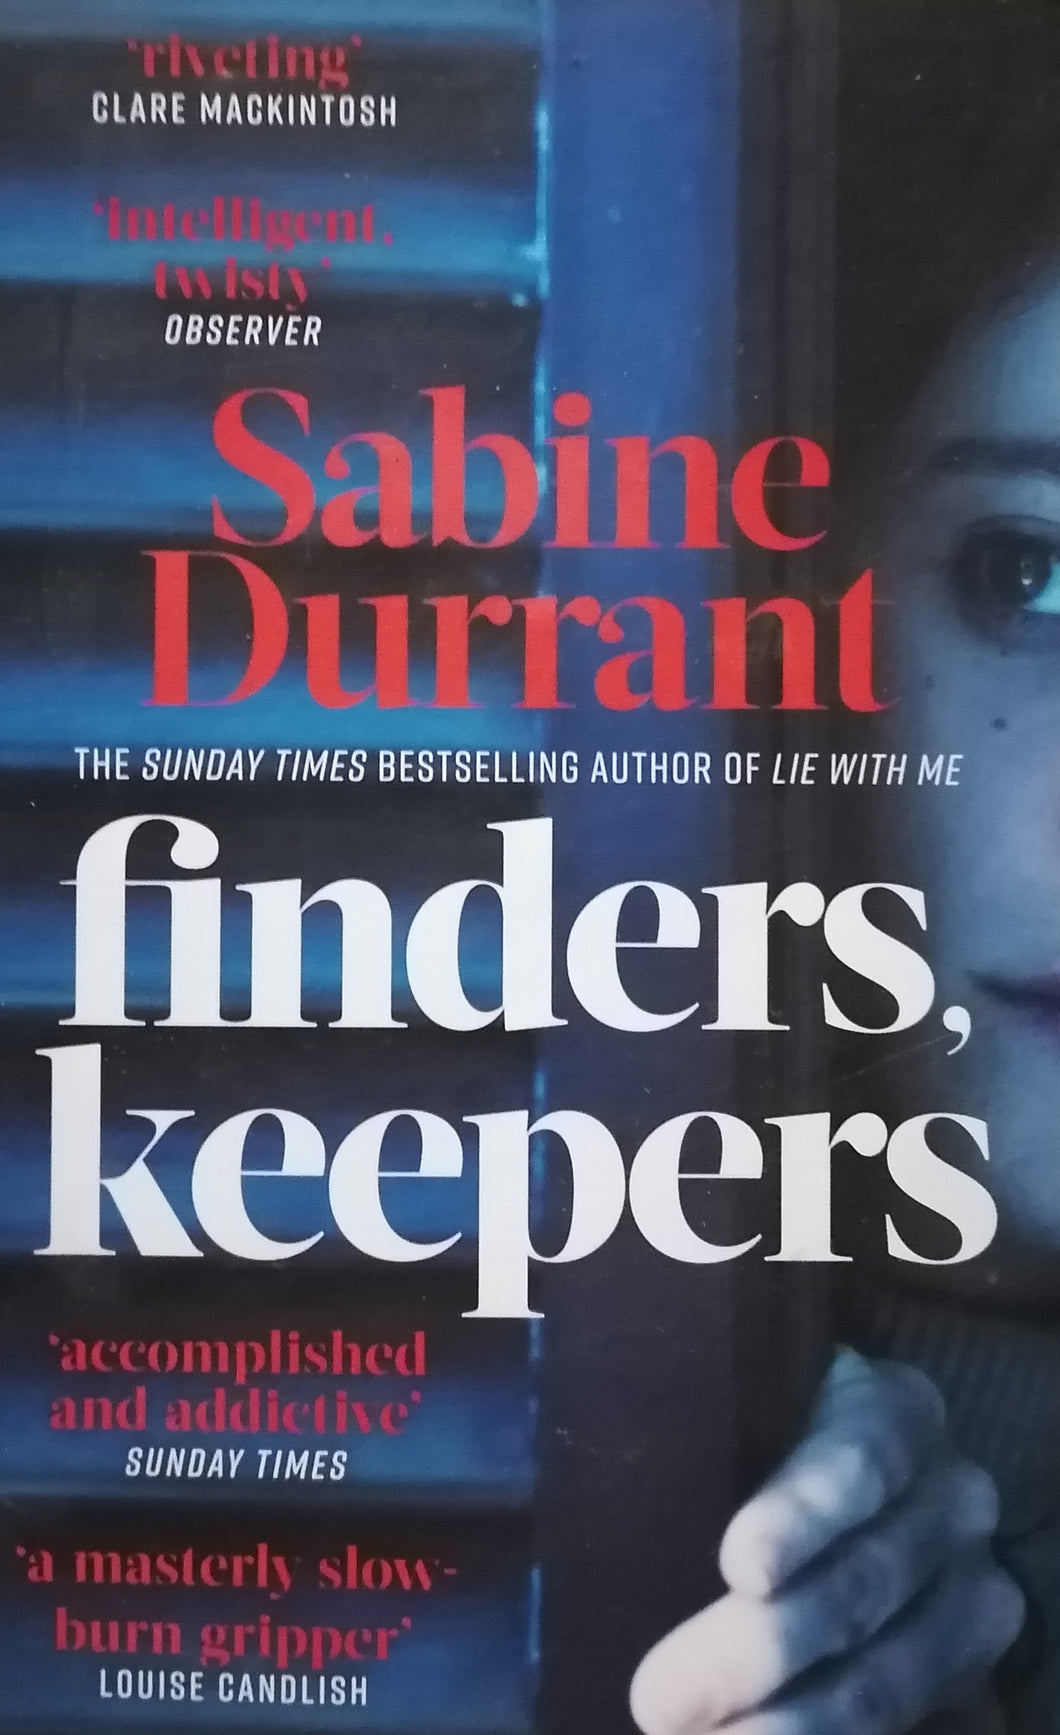 Finders, Keepers 'Accomplished And Addictive' Sunday Times by Sabine Durant